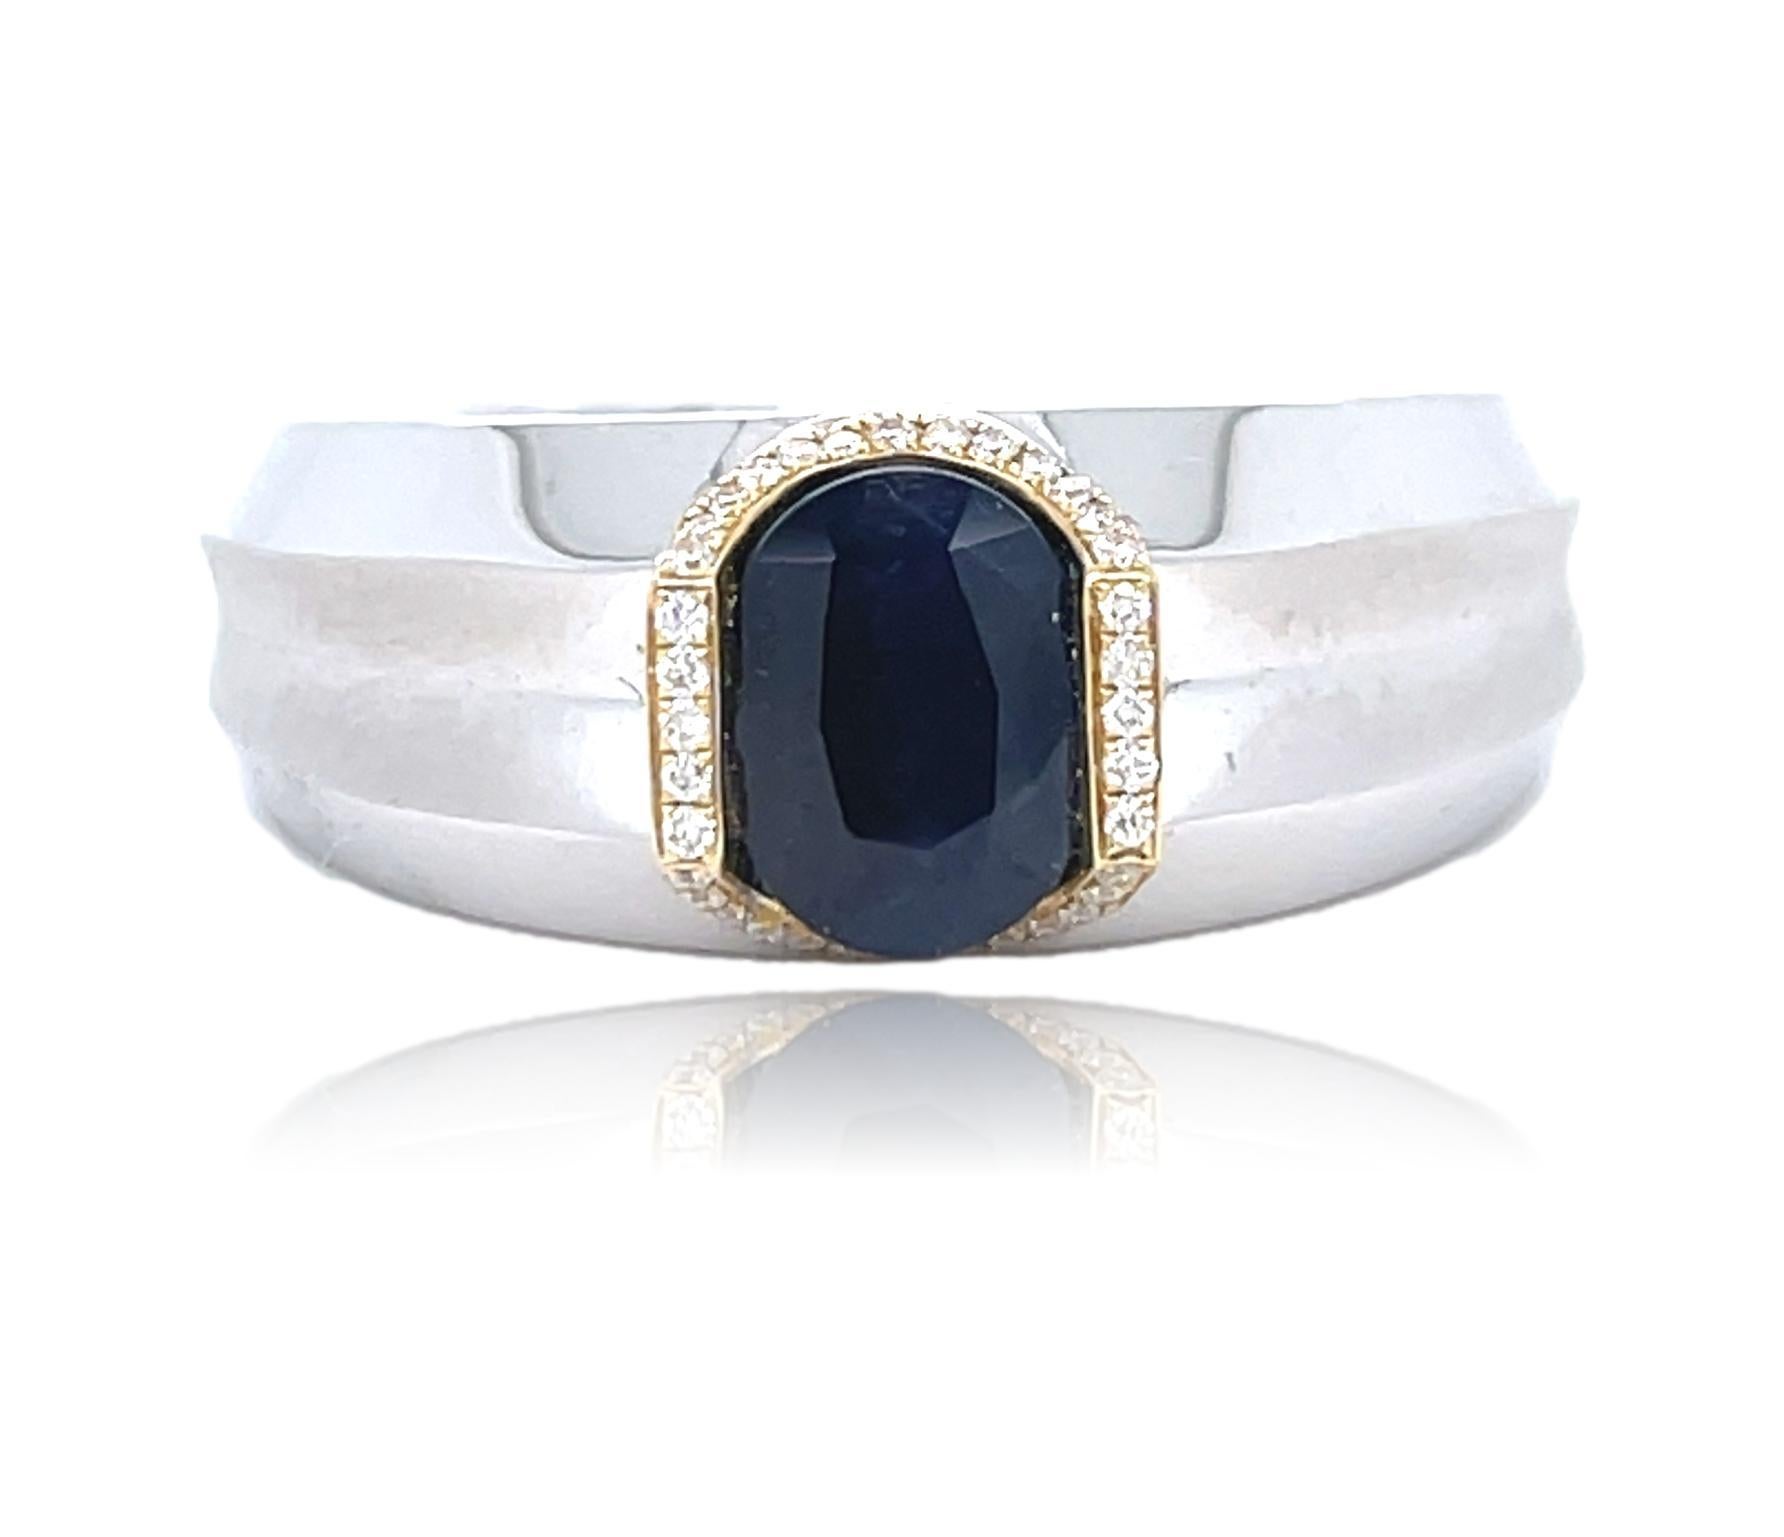 This unique Men's ring has a deep blue oval cut Sapphire surrounded by top quality brilliant cut diamonds  and is set in 14K white and yellow gold. It comes in a beautiful box ready for the perfect gift!

14KWY:            9.60 gms
Sapphire wt:   